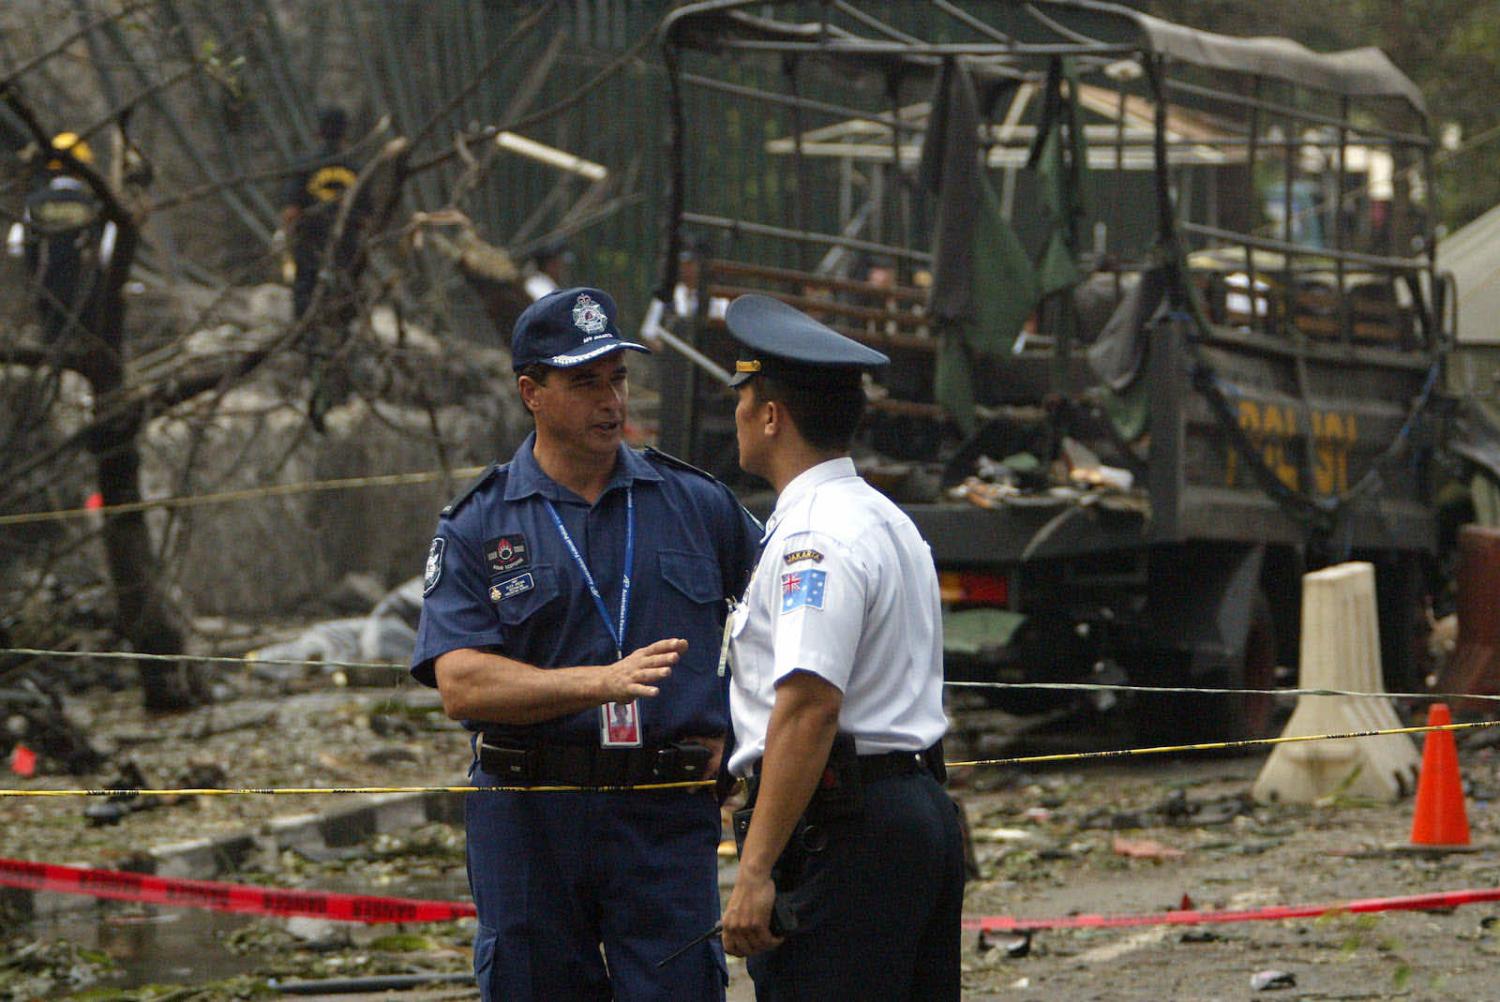 An Australian Federal Police officer, left, speaks with a security guard the day after the bombing of the Australian Embassy in Jakarta, Indonesia, on 9 September 2004 (Dimas Ardian/Getty Images)